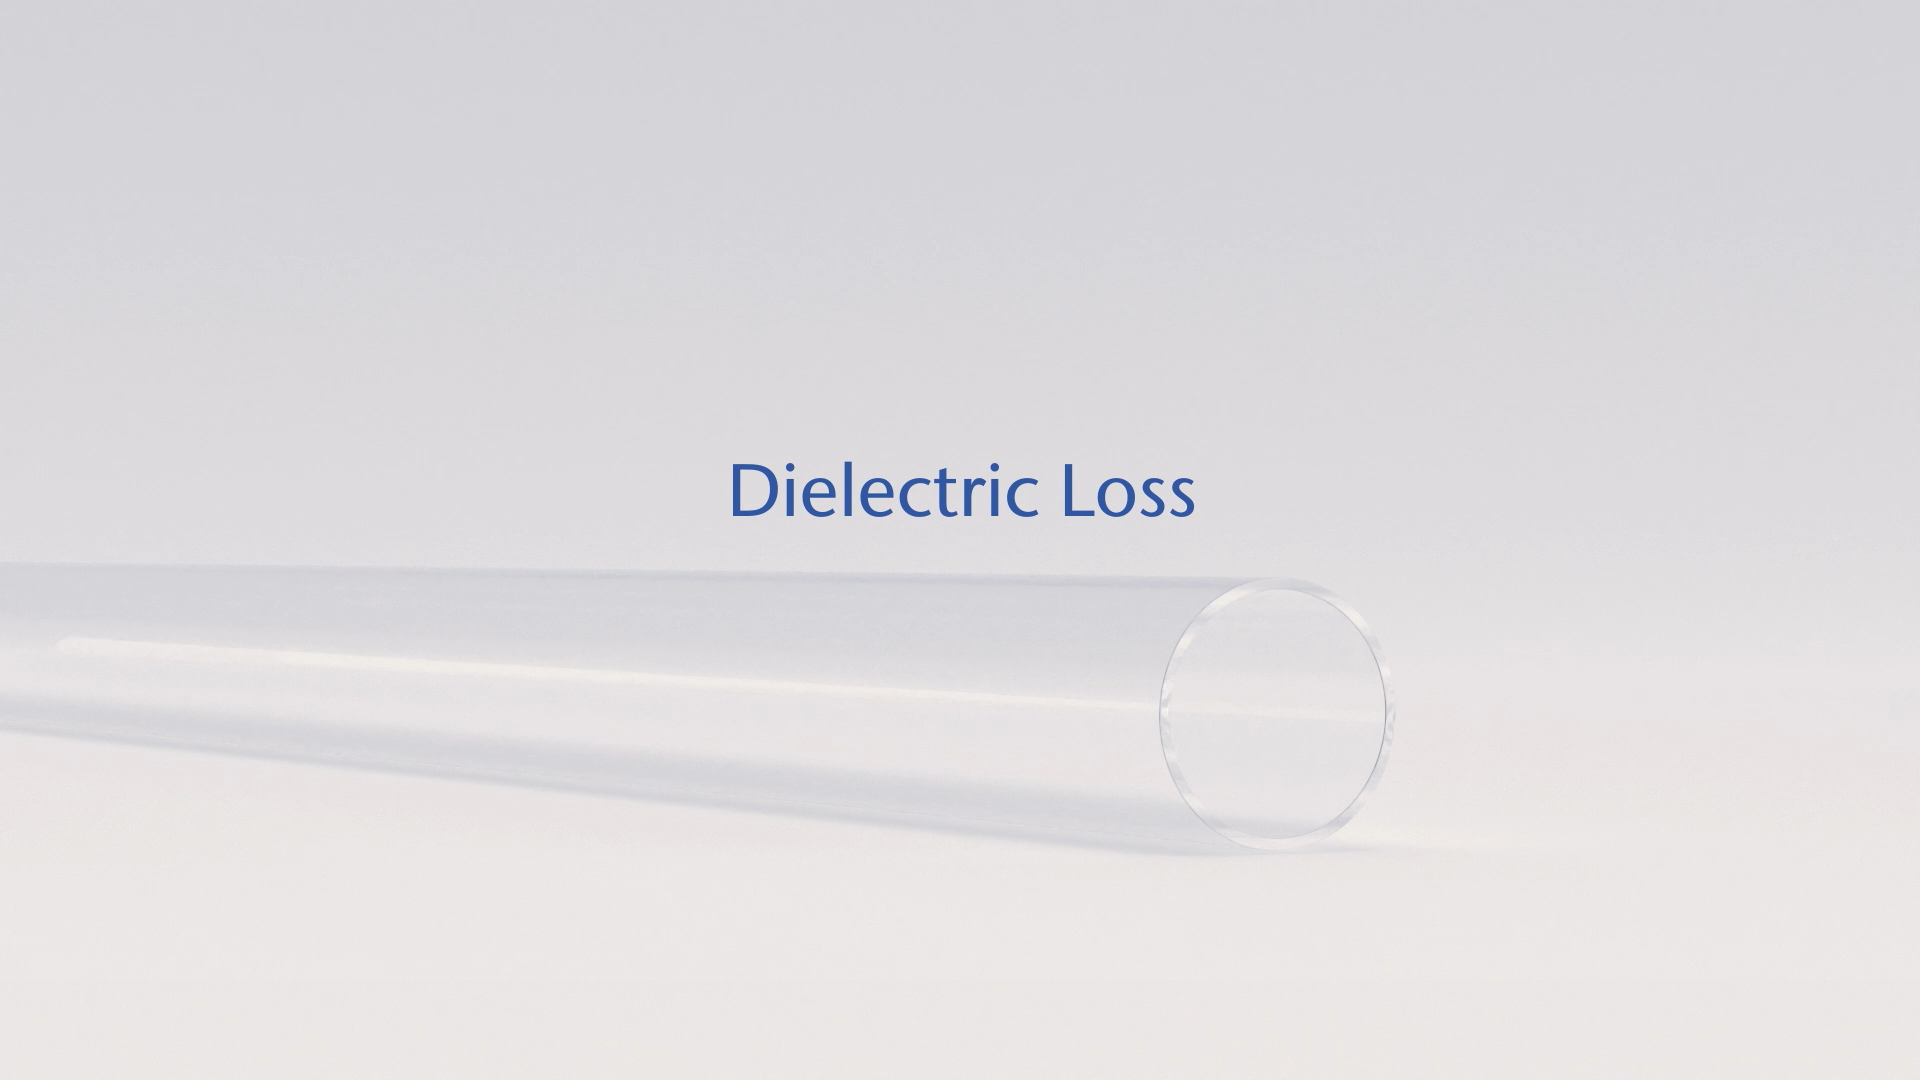 SCHOTT glass leads to low dielectric loss and improved communications performance.